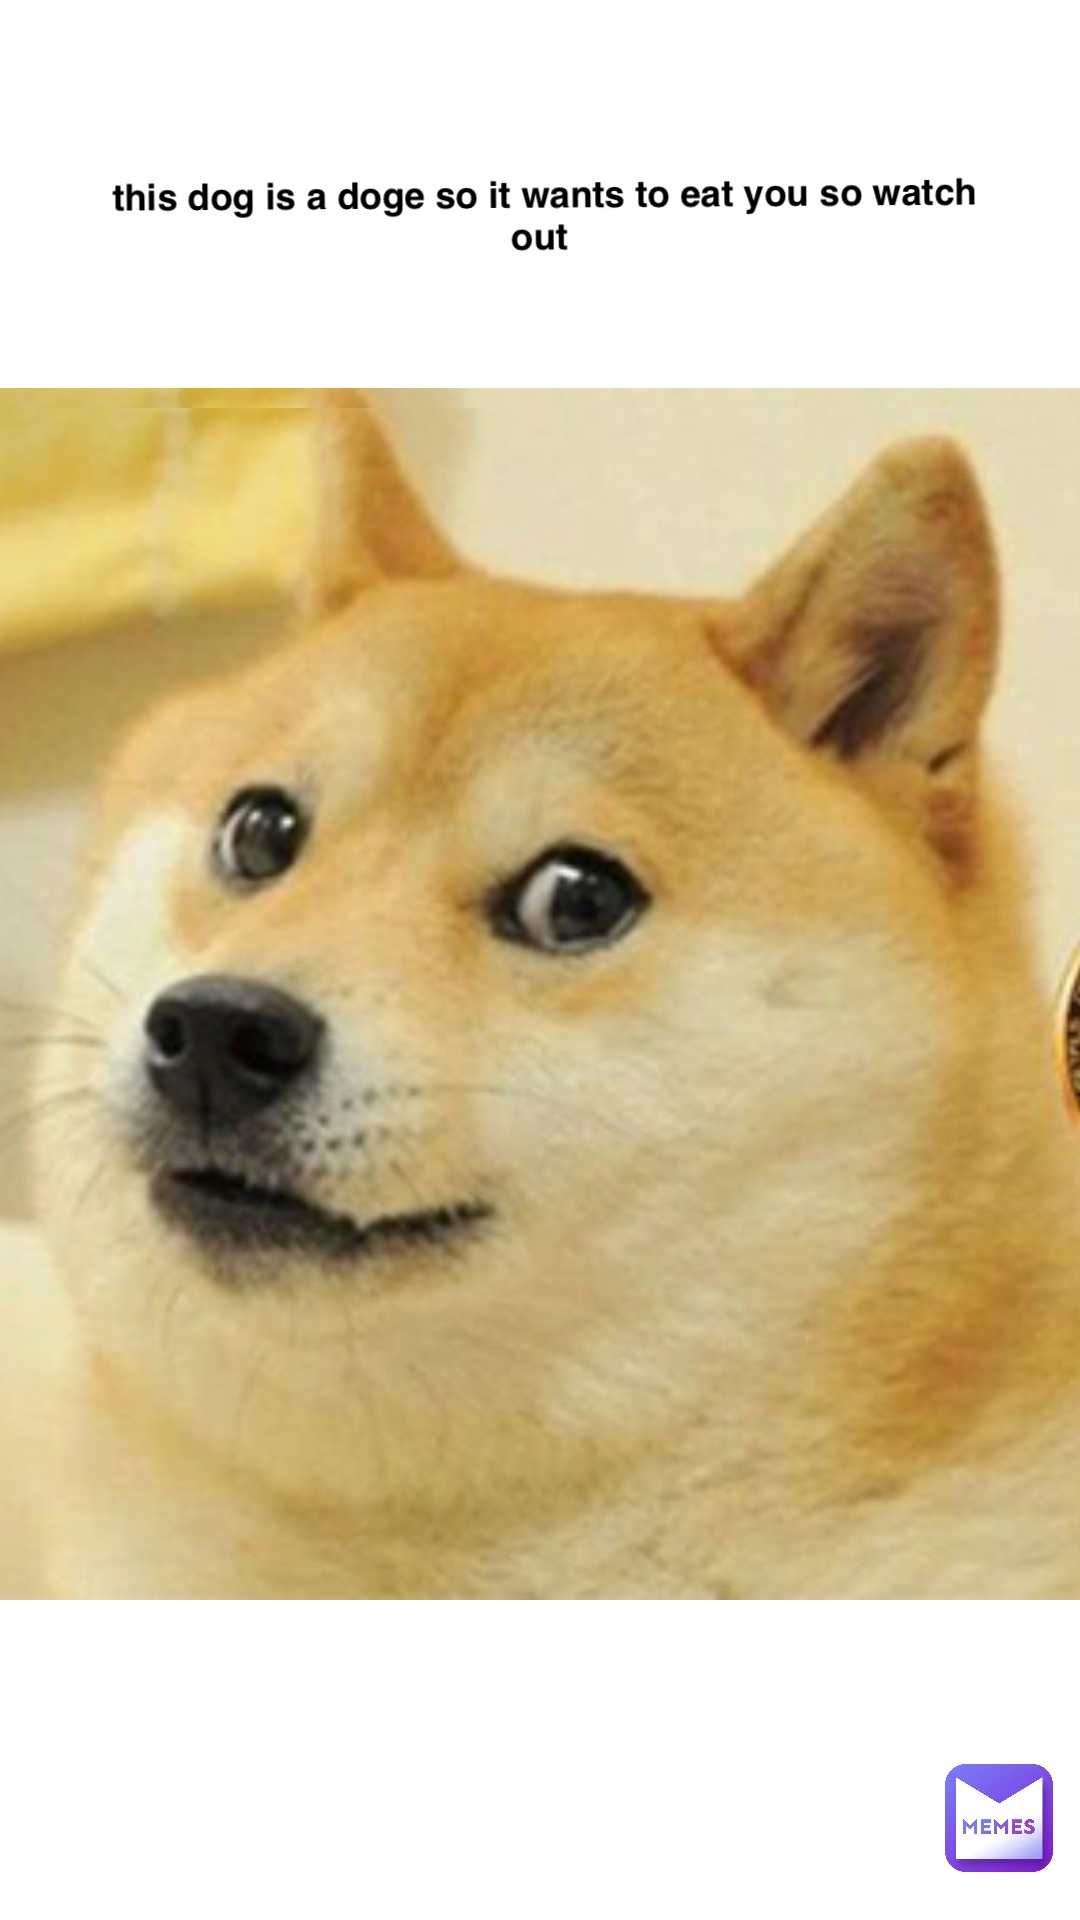 this dog is a doge so it wants to eat you so watch out